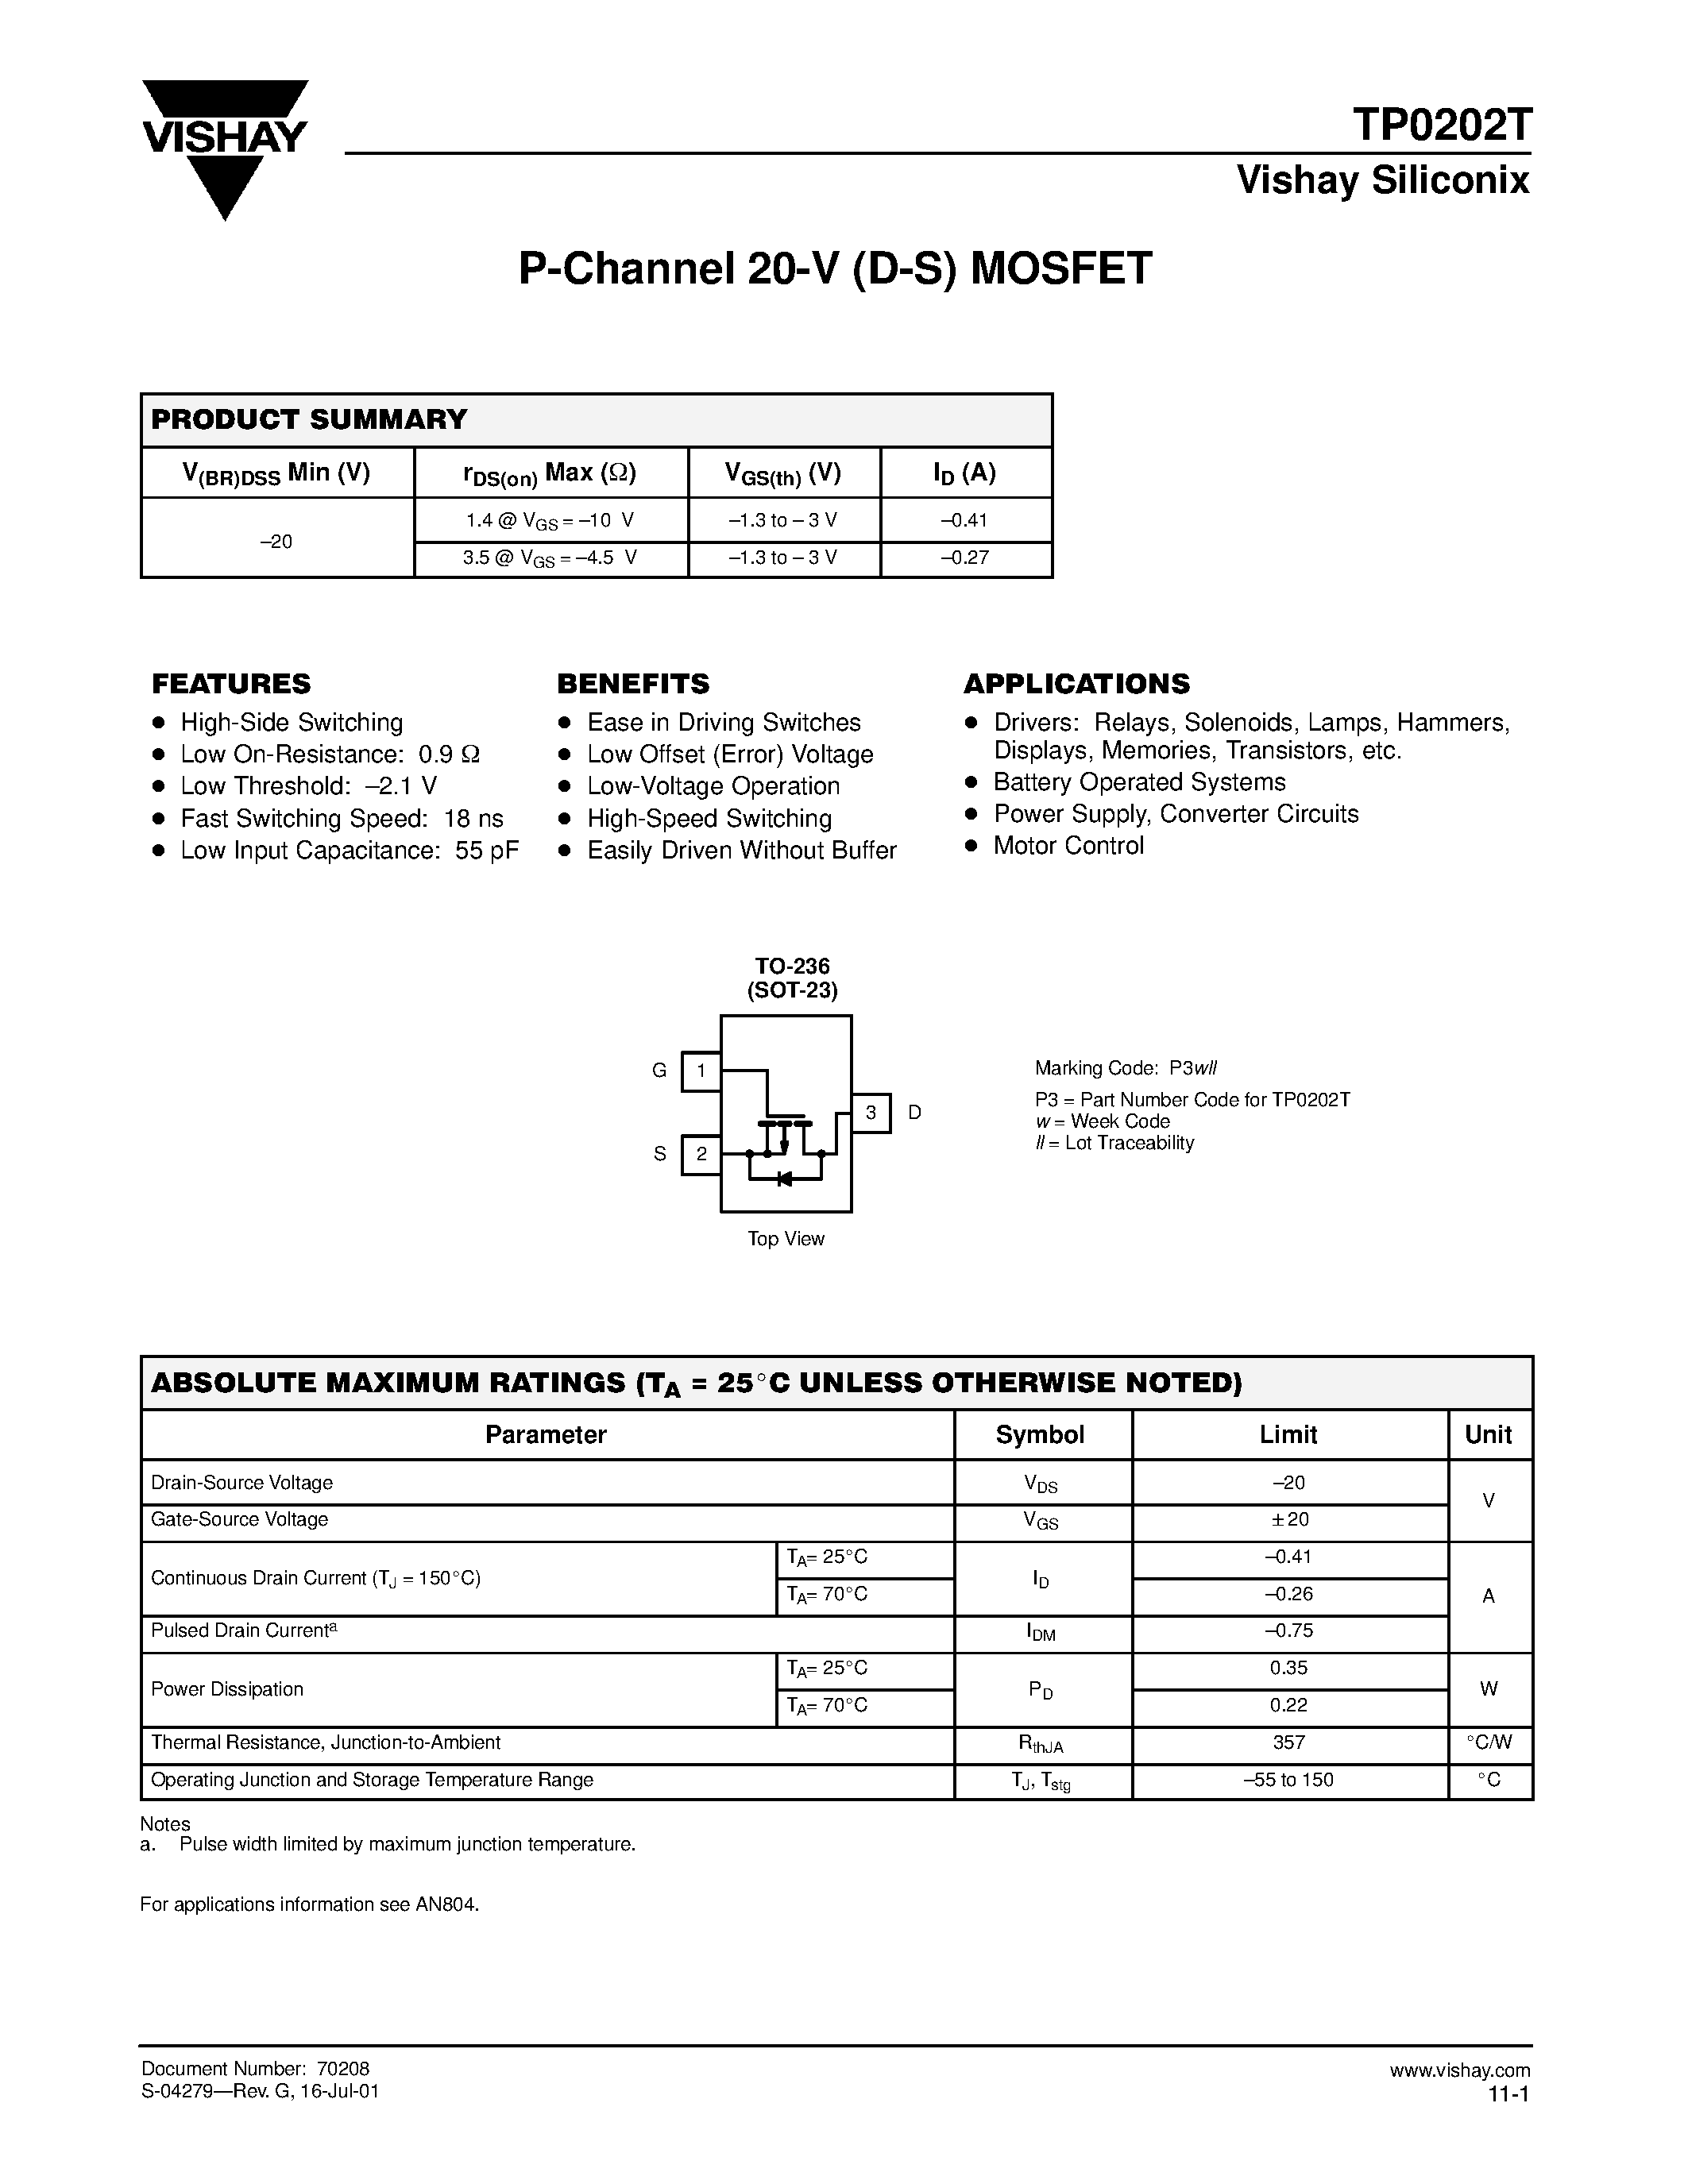 Datasheet TP0202T - P-Channel 20-V (D-S) MOSFET page 1